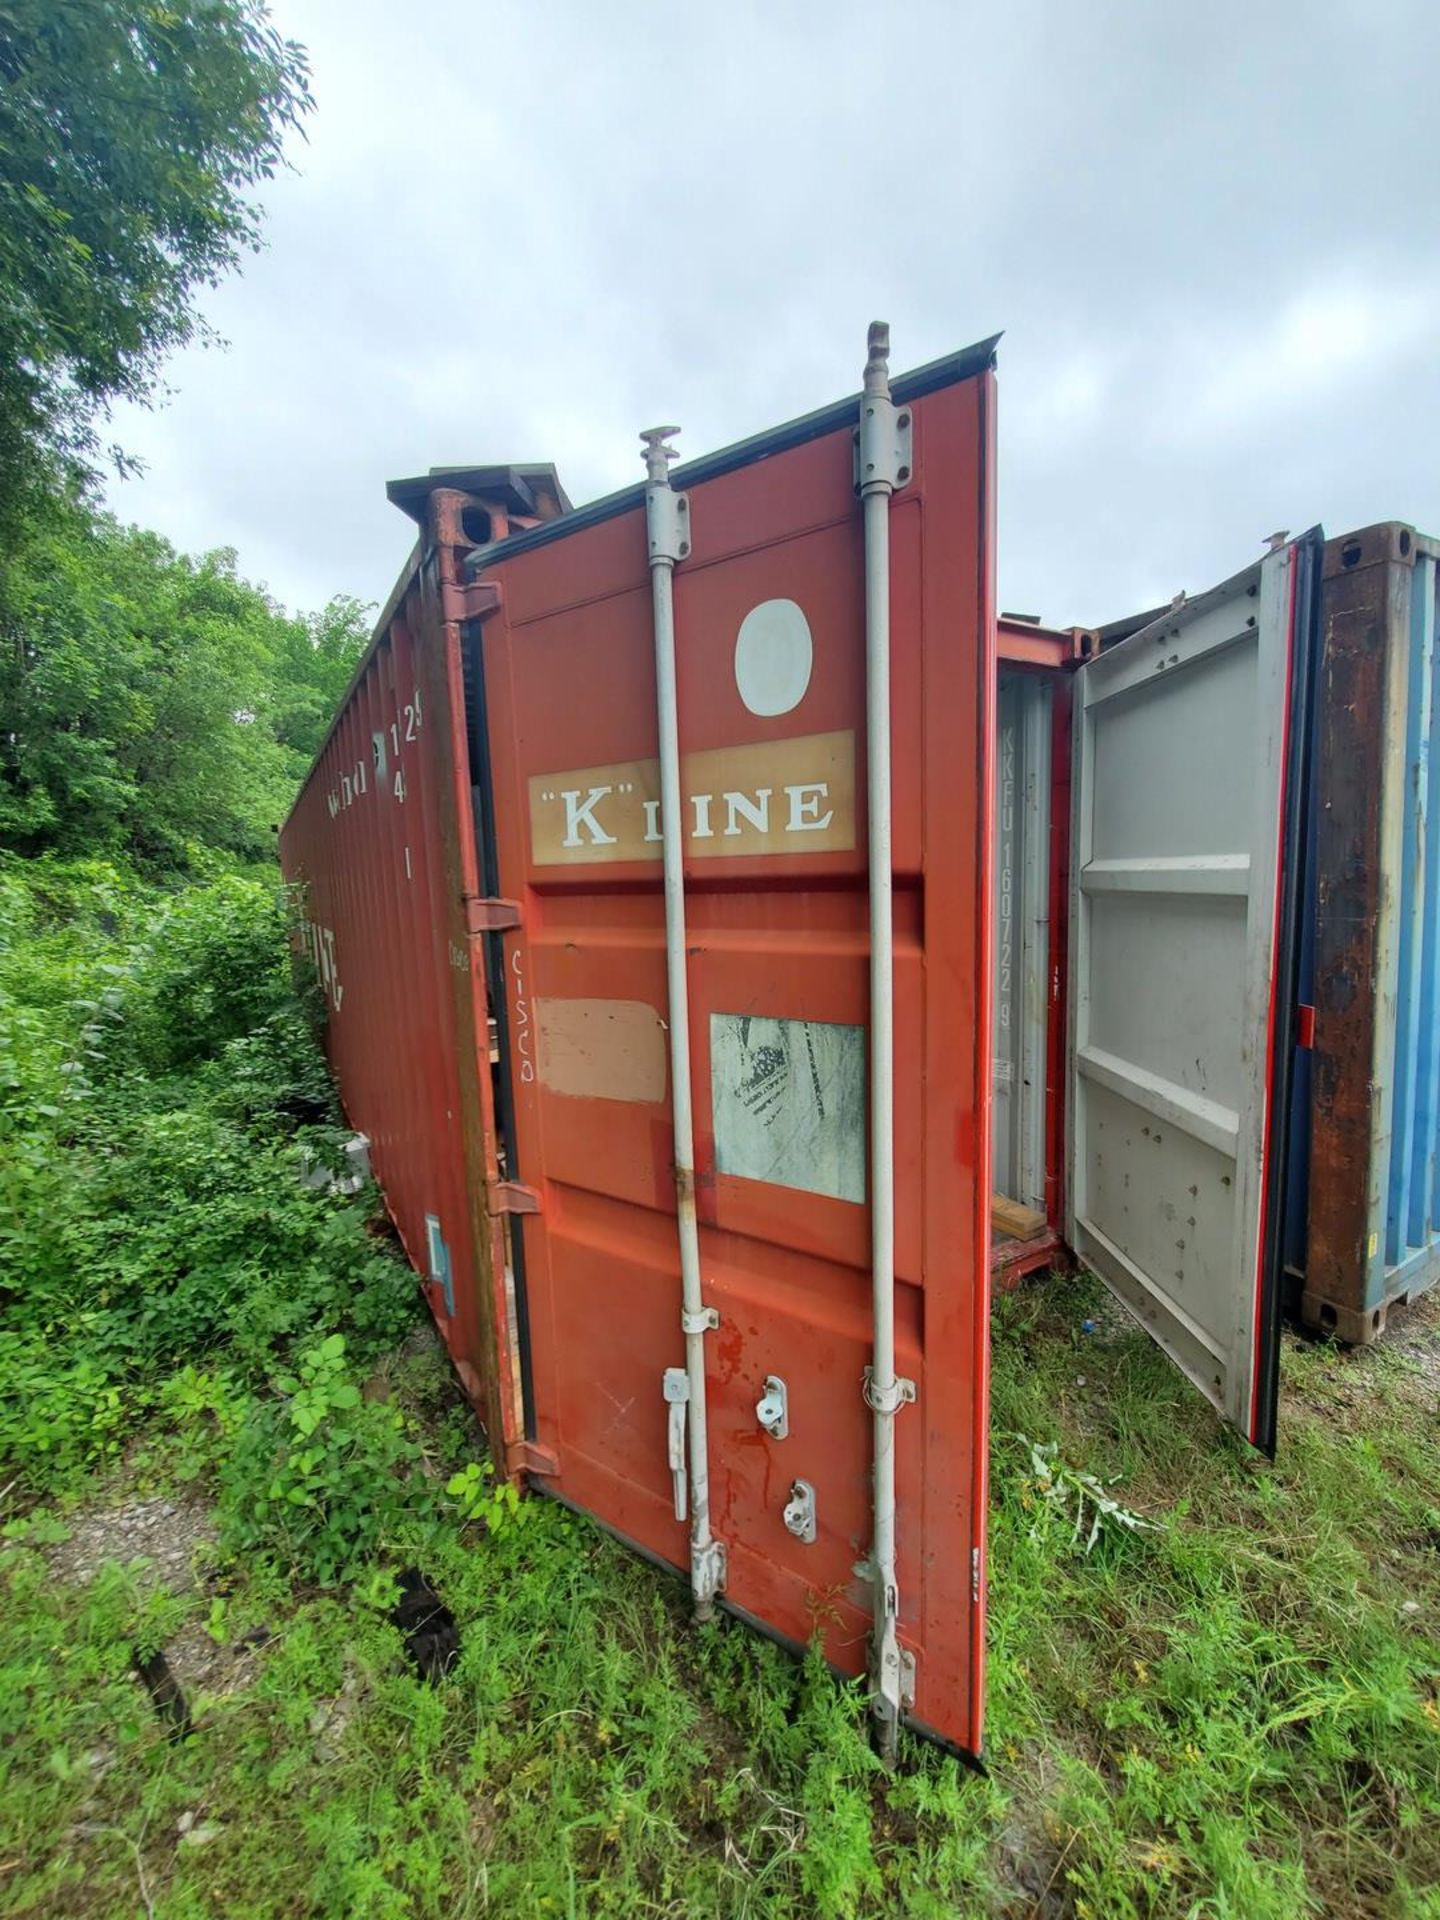 K-Line Shipping Container, Dims: 40'L x 8'W x 8'6'H; W/ Cooler Contents; To Include But Not